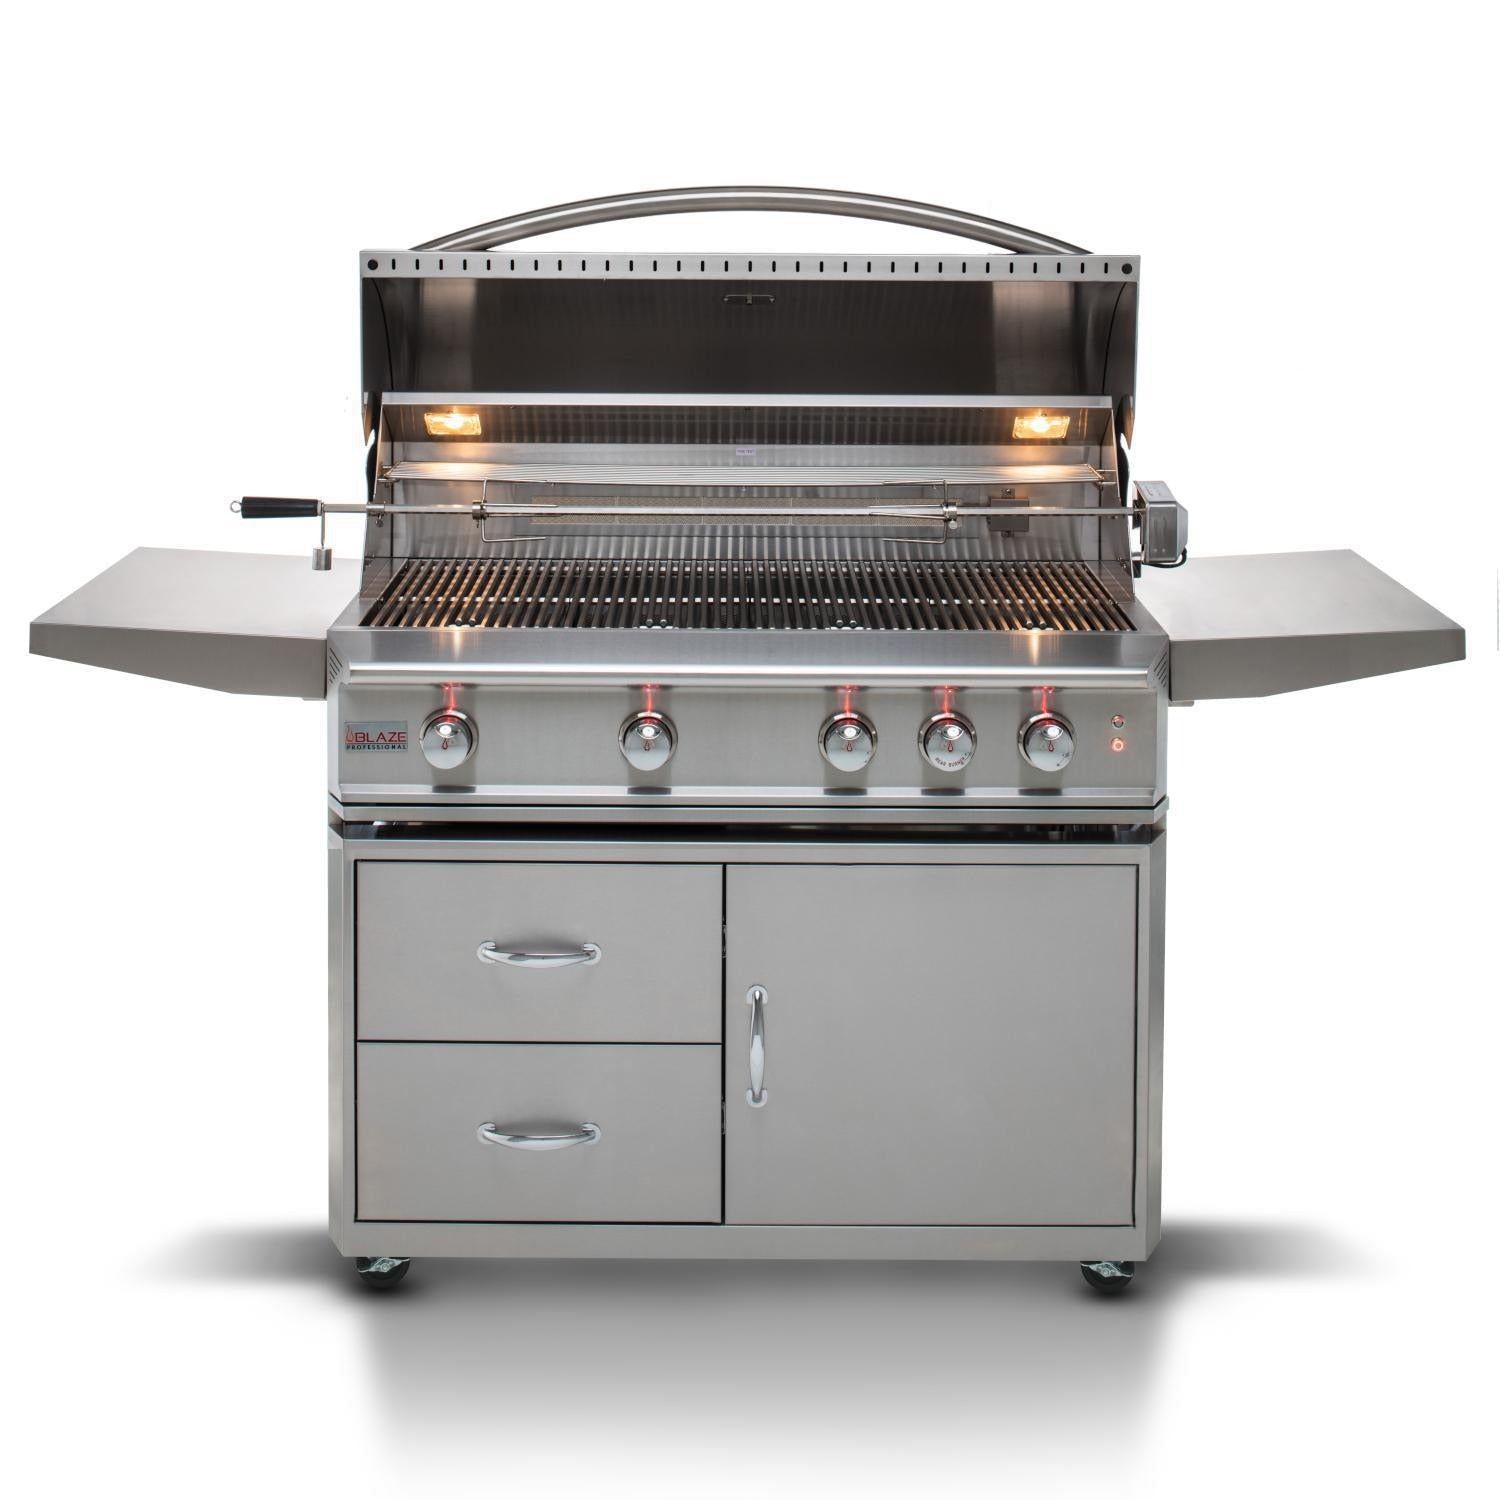 Blaze Professional LUX 44-Inch 4-Burner Freestanding Gas Grill With Rear Infrared Burner - BLZ-4PRO-LP/NG